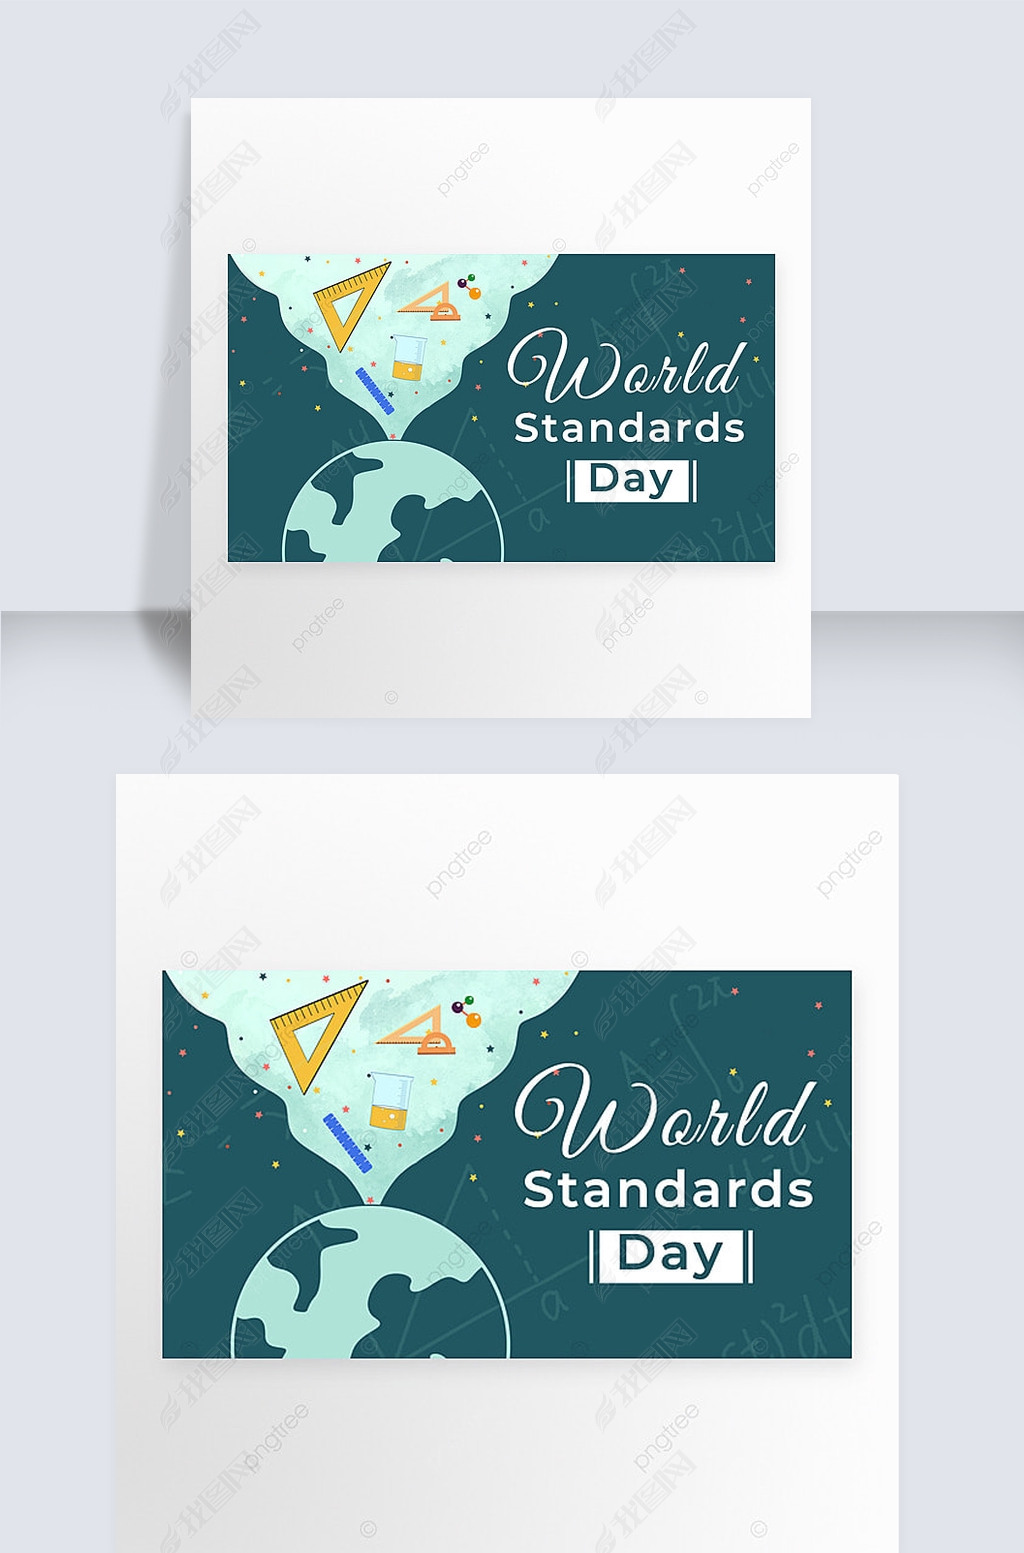 world standards day contracted creative banner